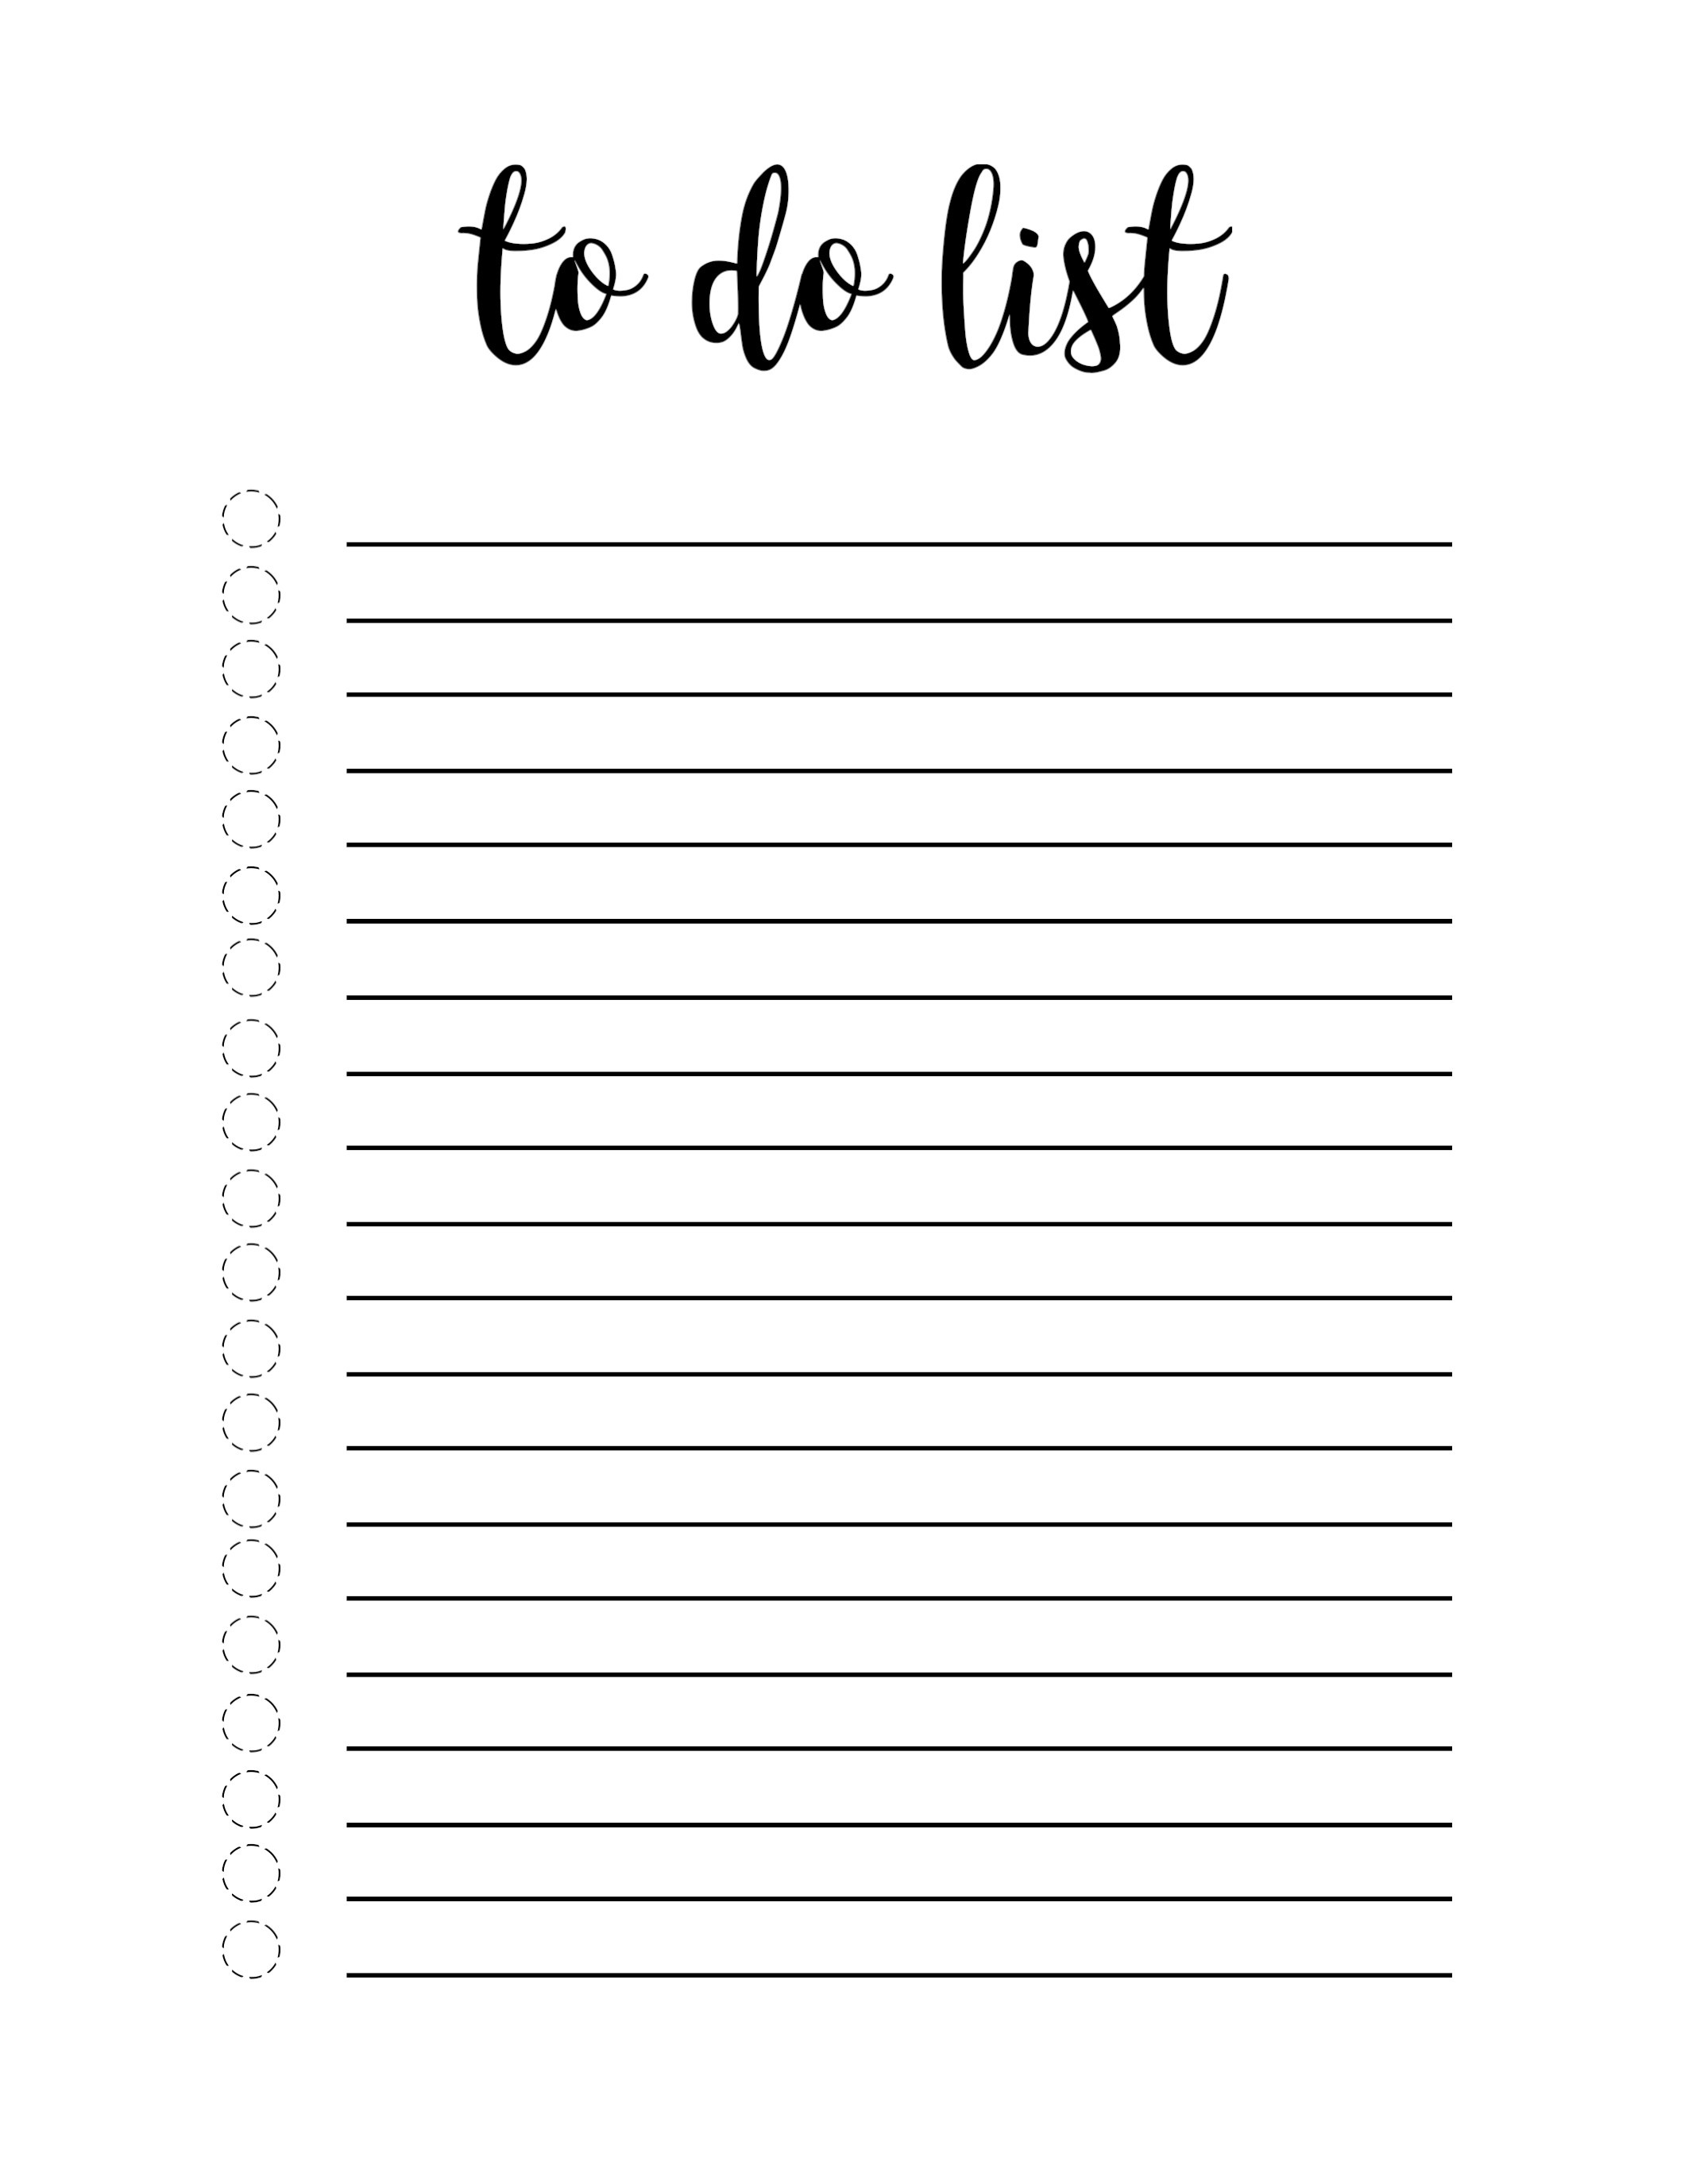 Free Printable To Do List Template - Paper Trail Design - Free Printable Checklist